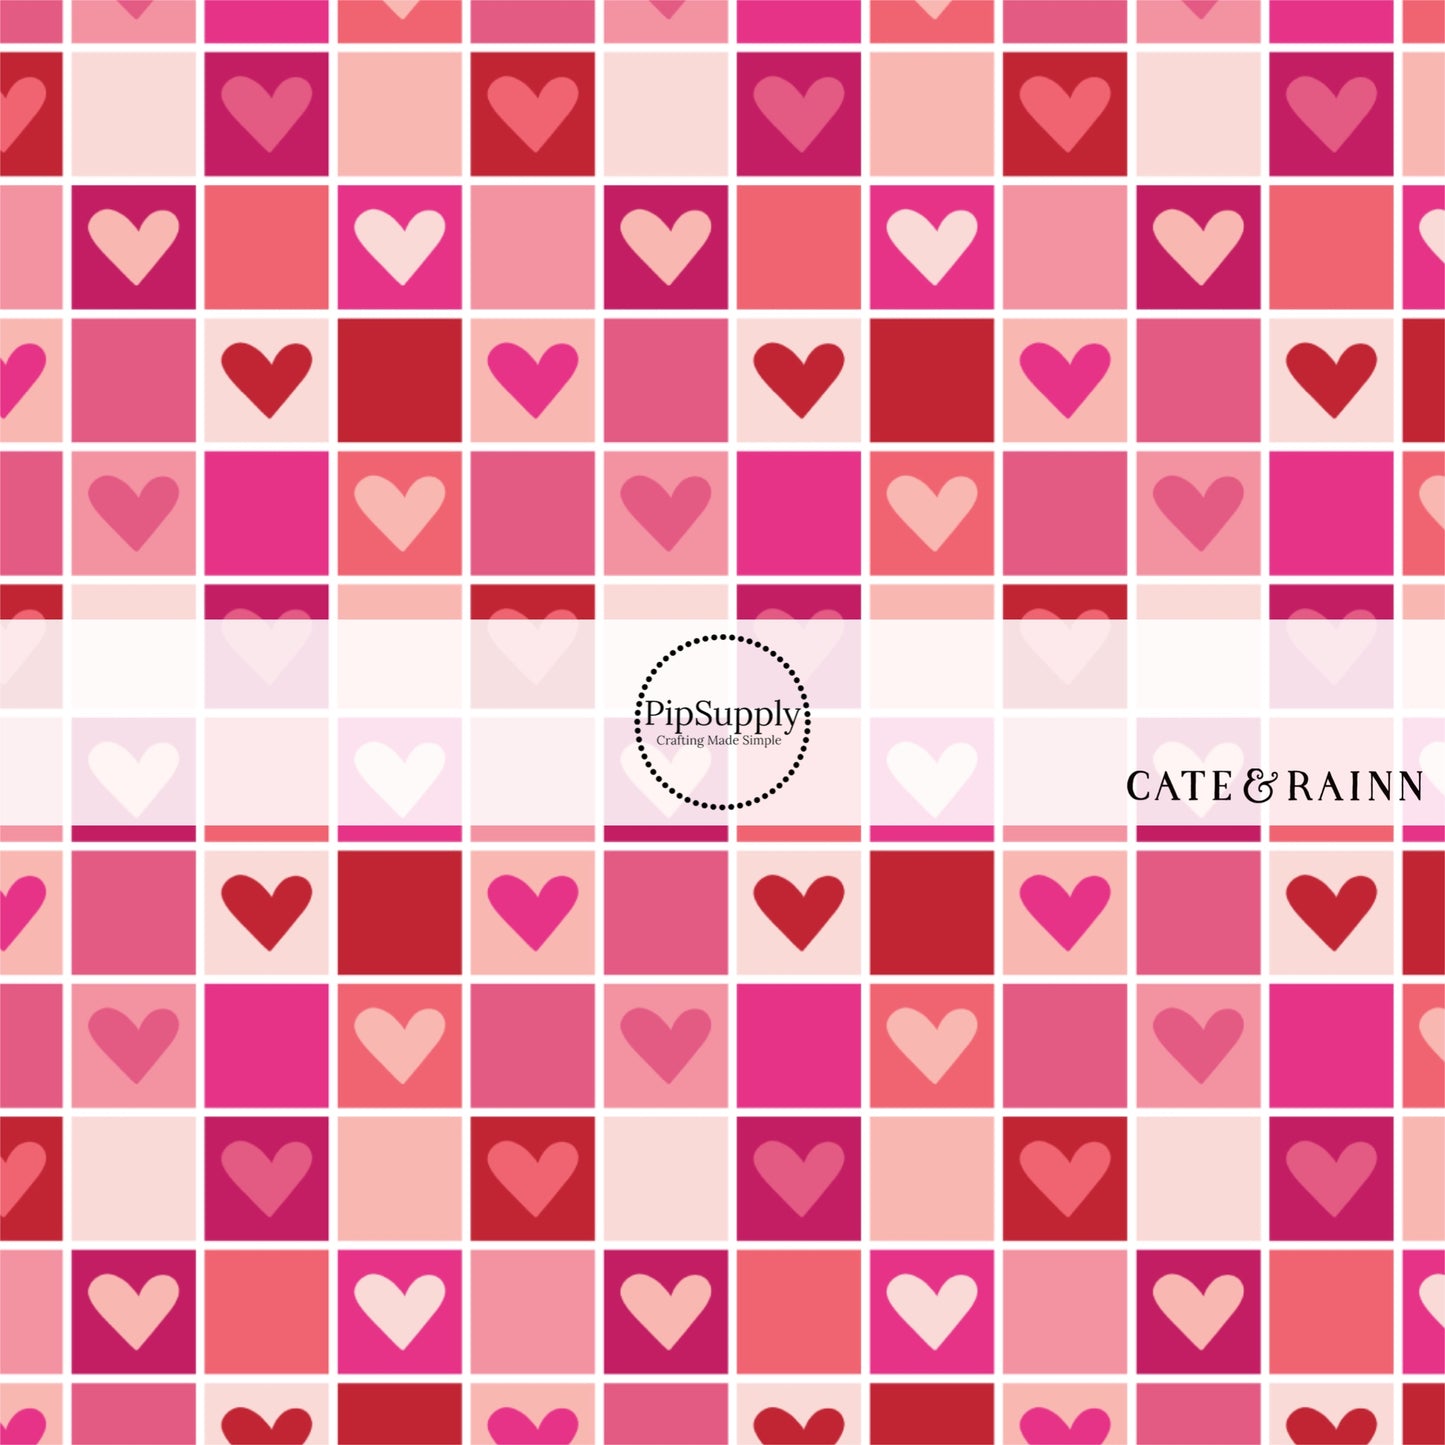 Dark pink, light pink, and dark red hearts on pink checkered bow strips